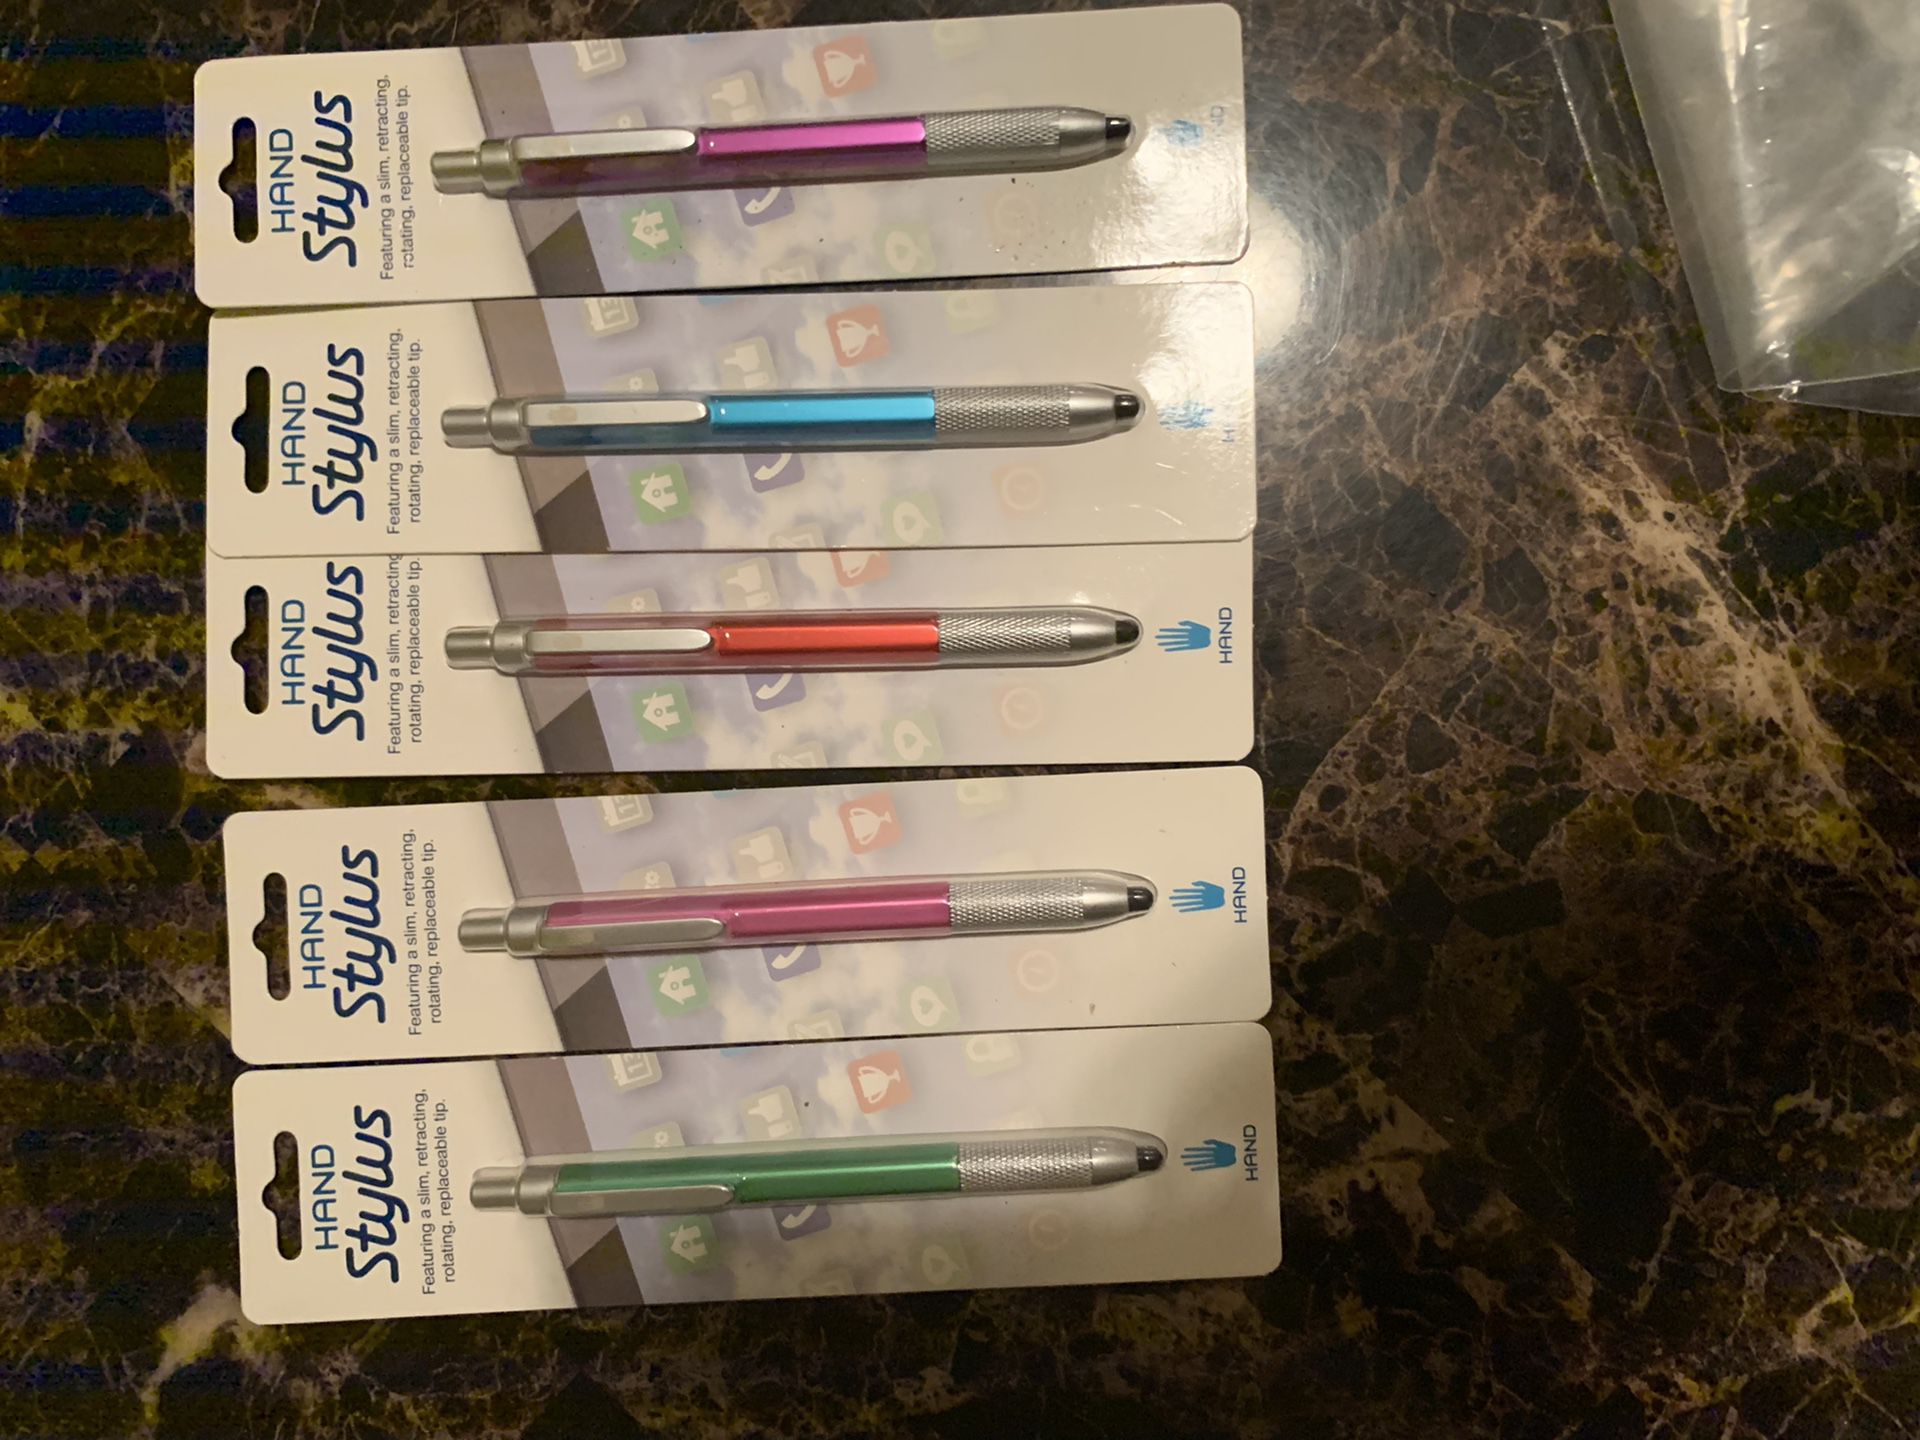 5 stylus pens for $3 for the pack